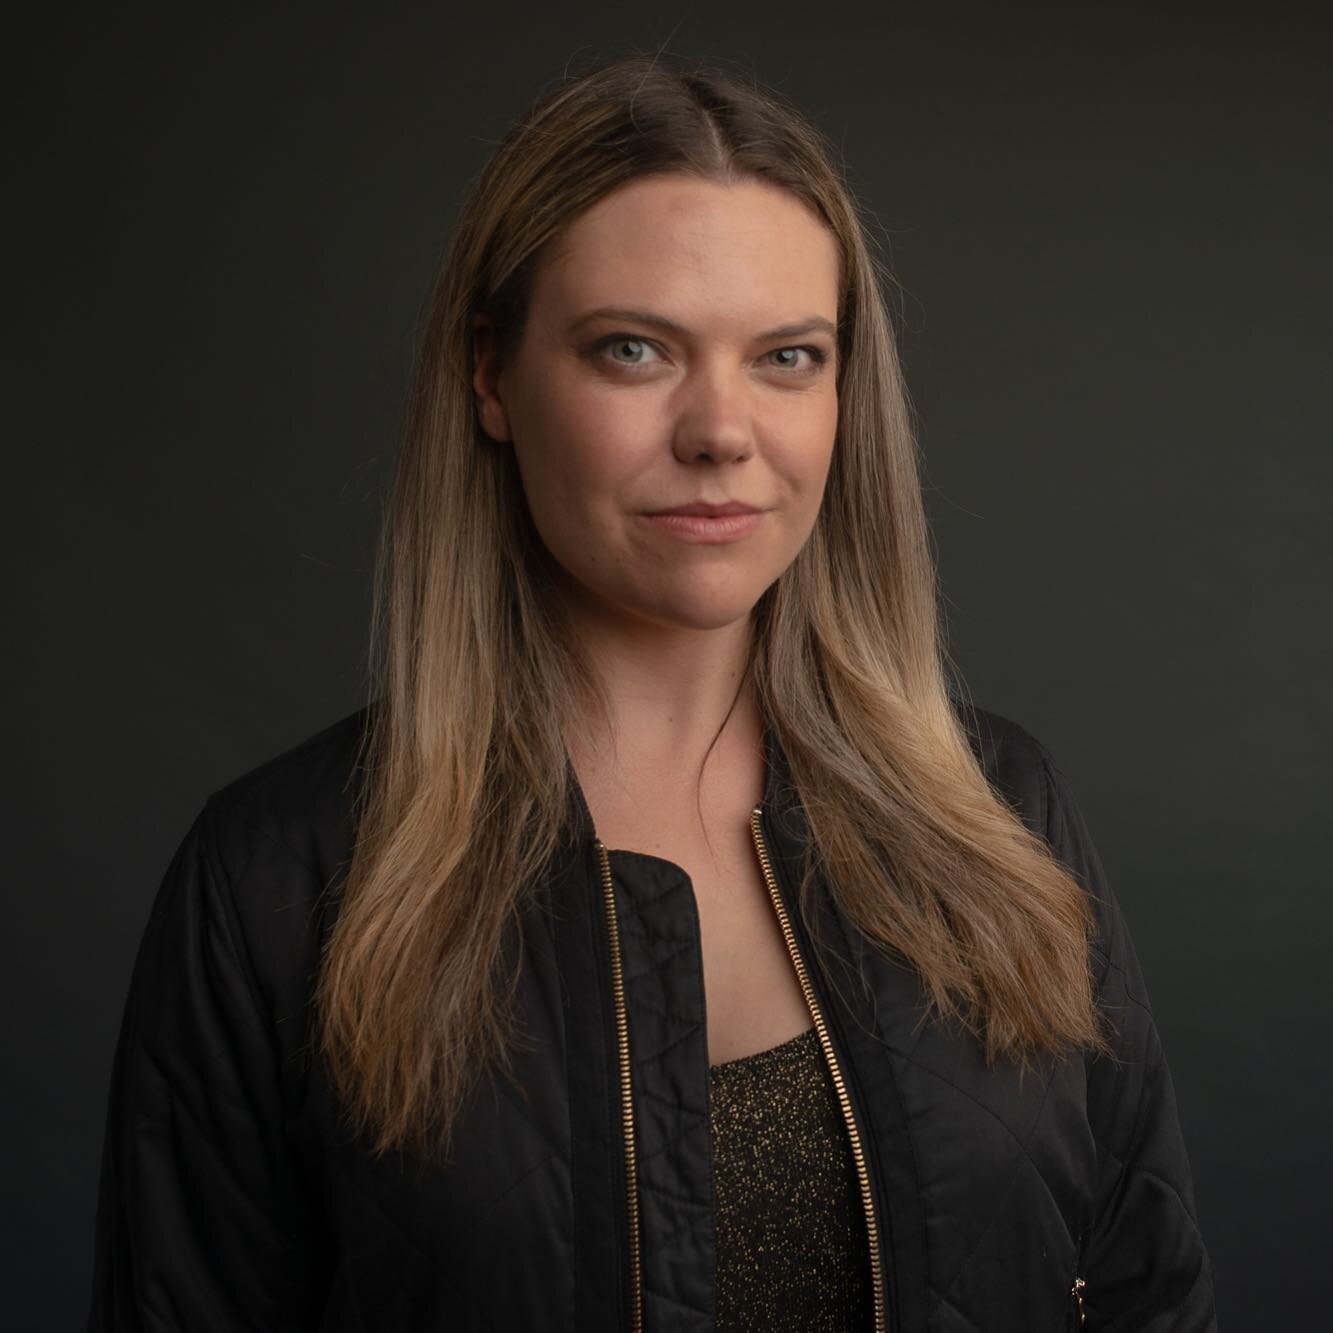 Melbourne&rsquo;s @elizacharley plays Kitty, the stay at home mum at the heart of #TheFortMovie&rsquo;s harrowing tale of family violence in everyday Australia. A seasoned actor, writer and producer, Eliza&rsquo;s work spans popular TV shows includin